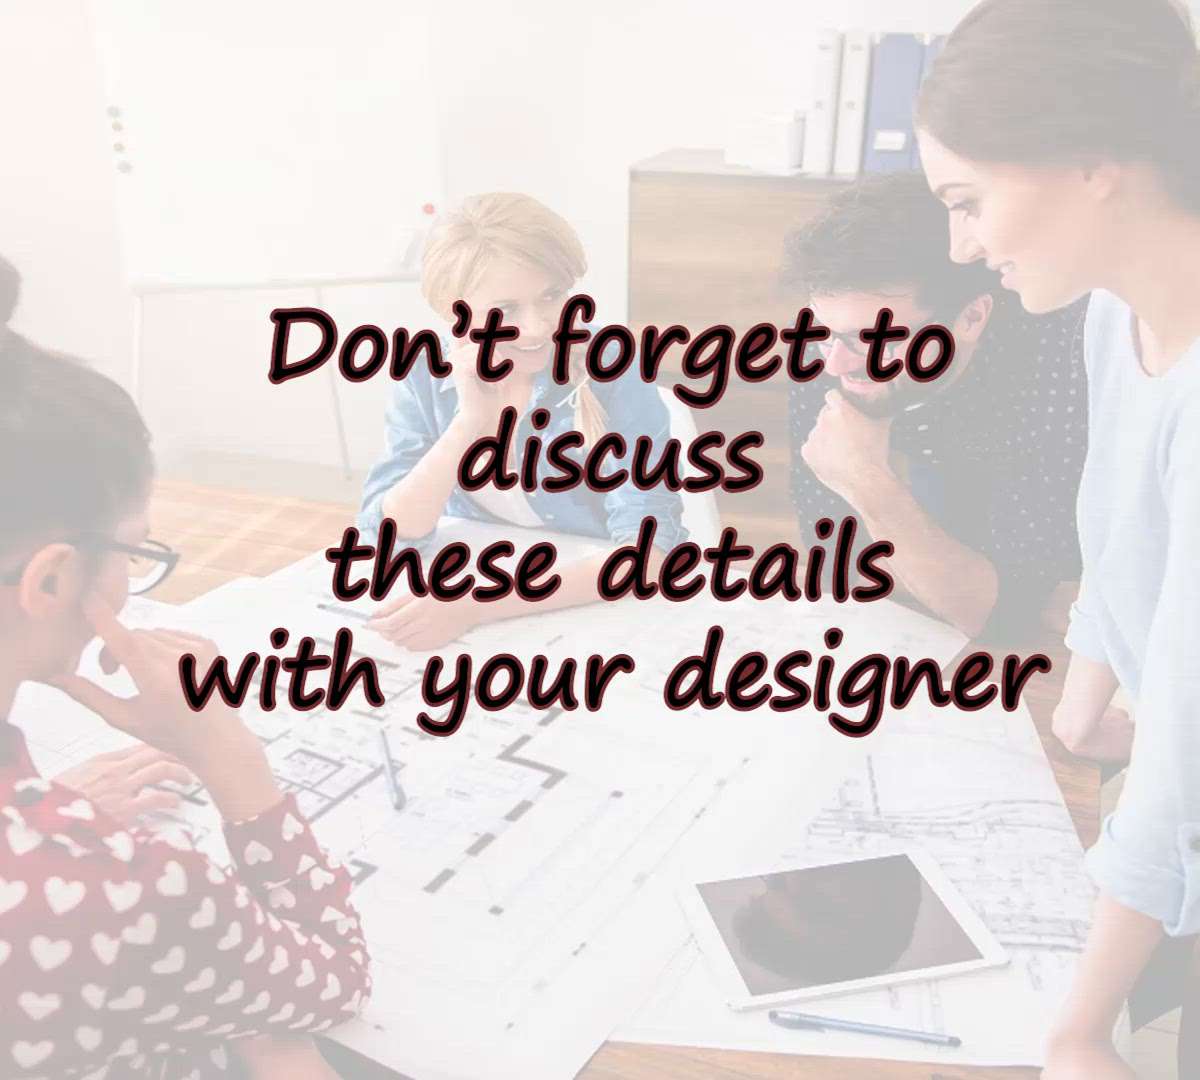 please discuss these details with your designer for a easy and smooth design journey.  

 #creatorsofkolo #breif #interior #designer #goodinterior #brief #keraladesigner #customerdesigner #customer #interior #designertips #tipskolo #koloapp #keraladesigner #discussion #customerdiscussion #interiortis #musthave #budget #requirements #interiorideas #geographicalconditions